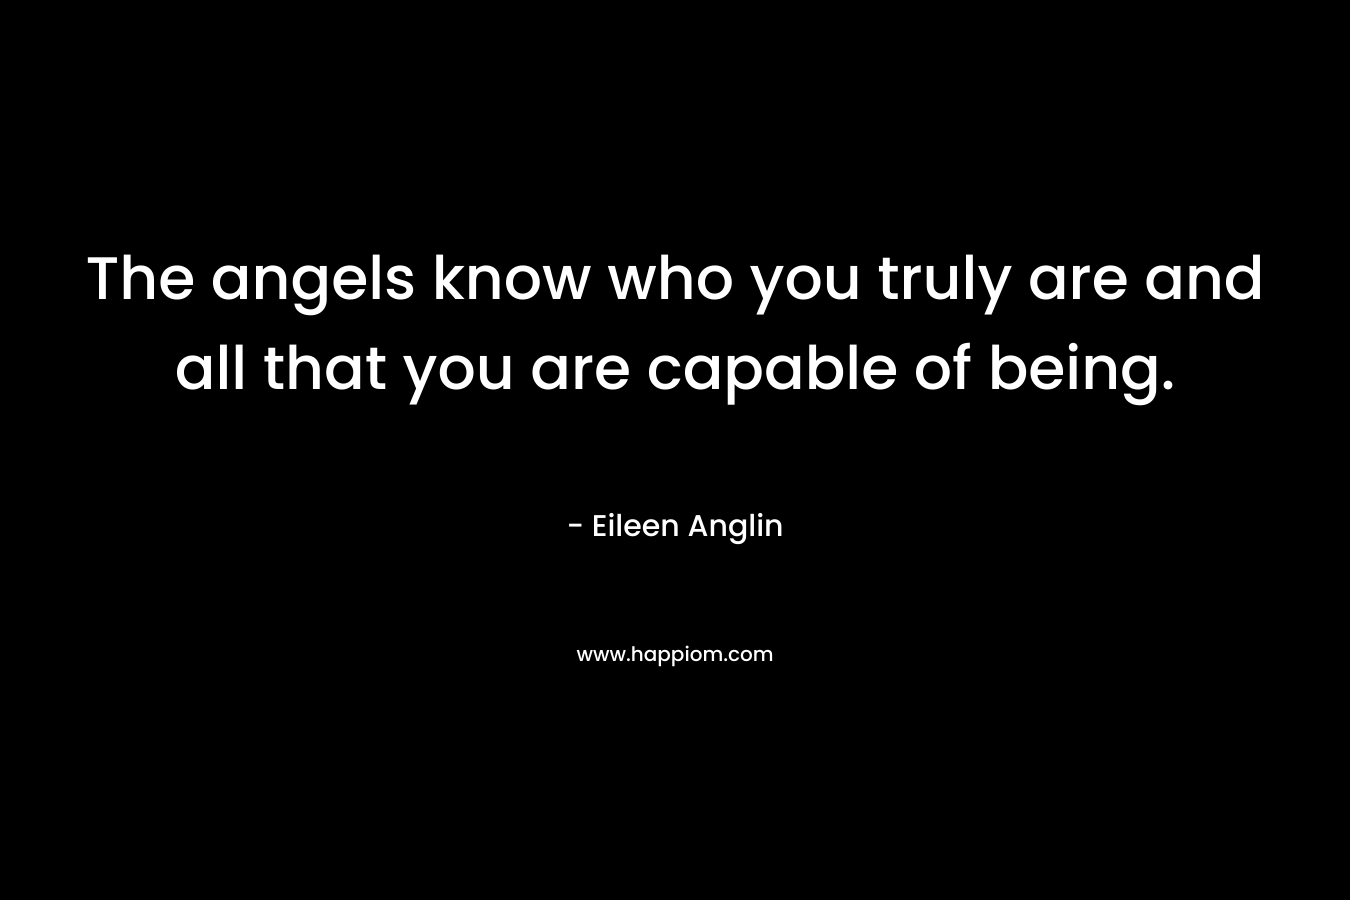 The angels know who you truly are and all that you are capable of being. – Eileen Anglin